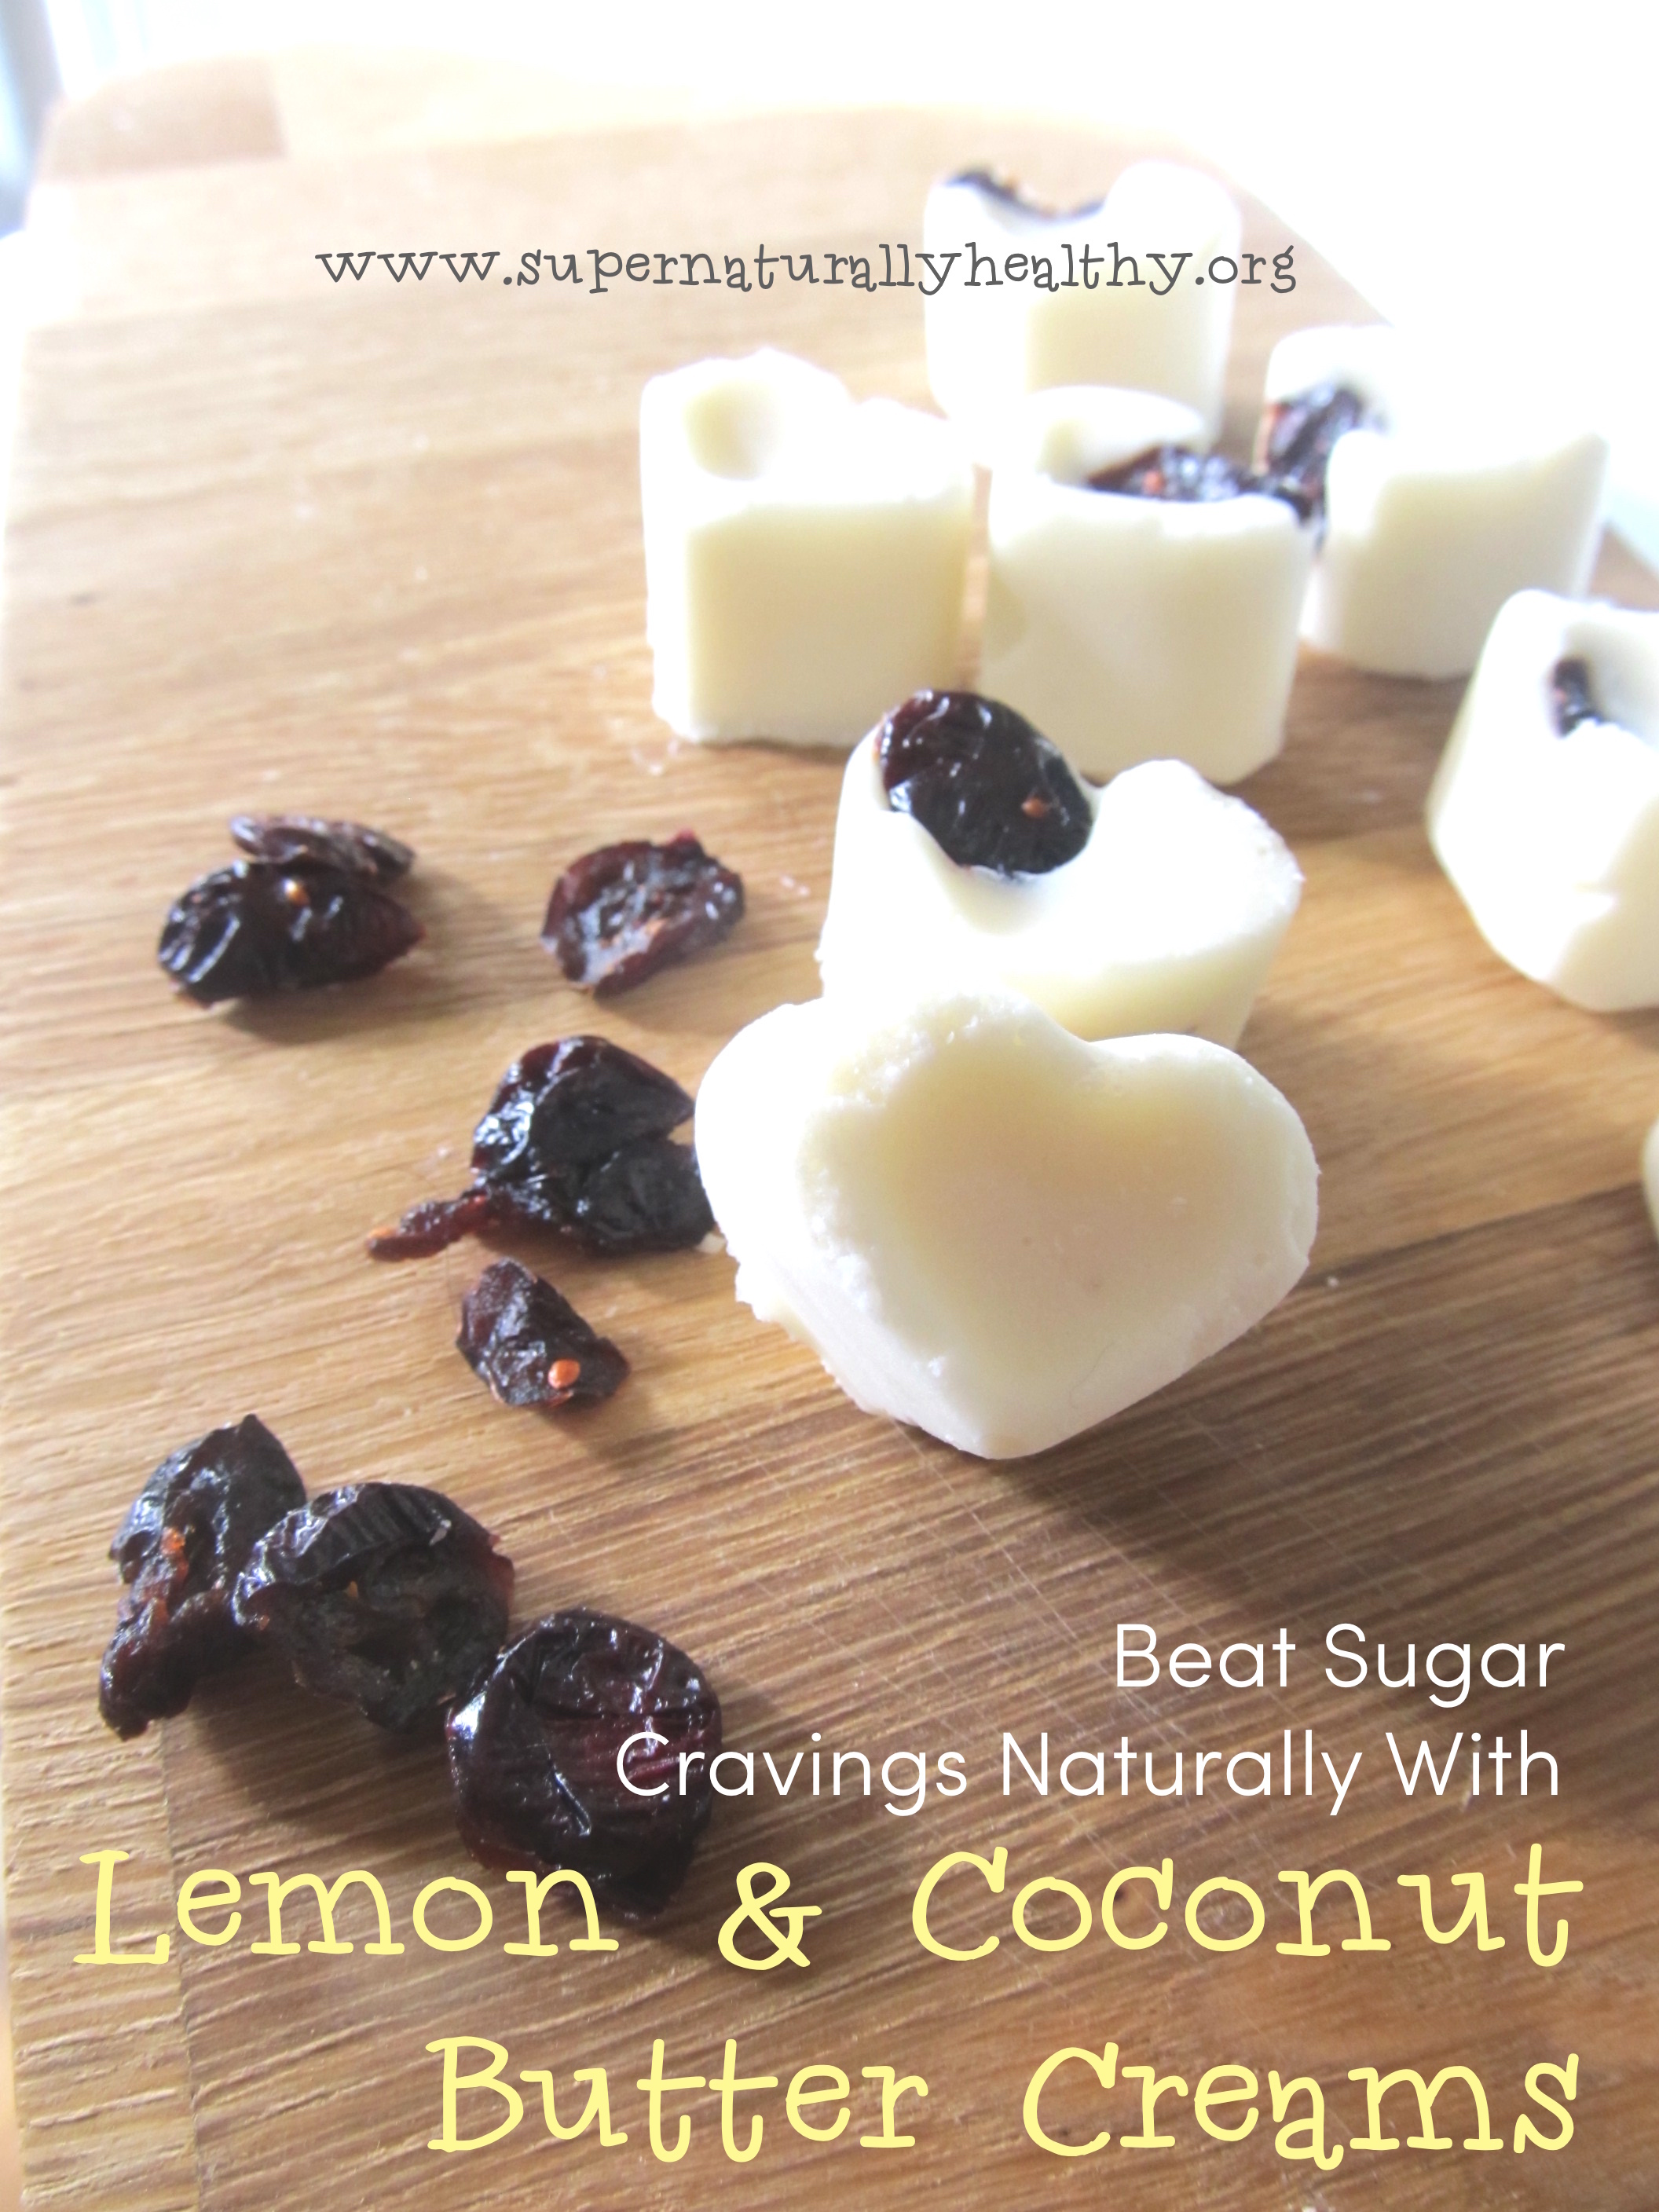 Lemon & Coconut Butter Creams: The Healthy Way to Beat Your Sugar Cravings